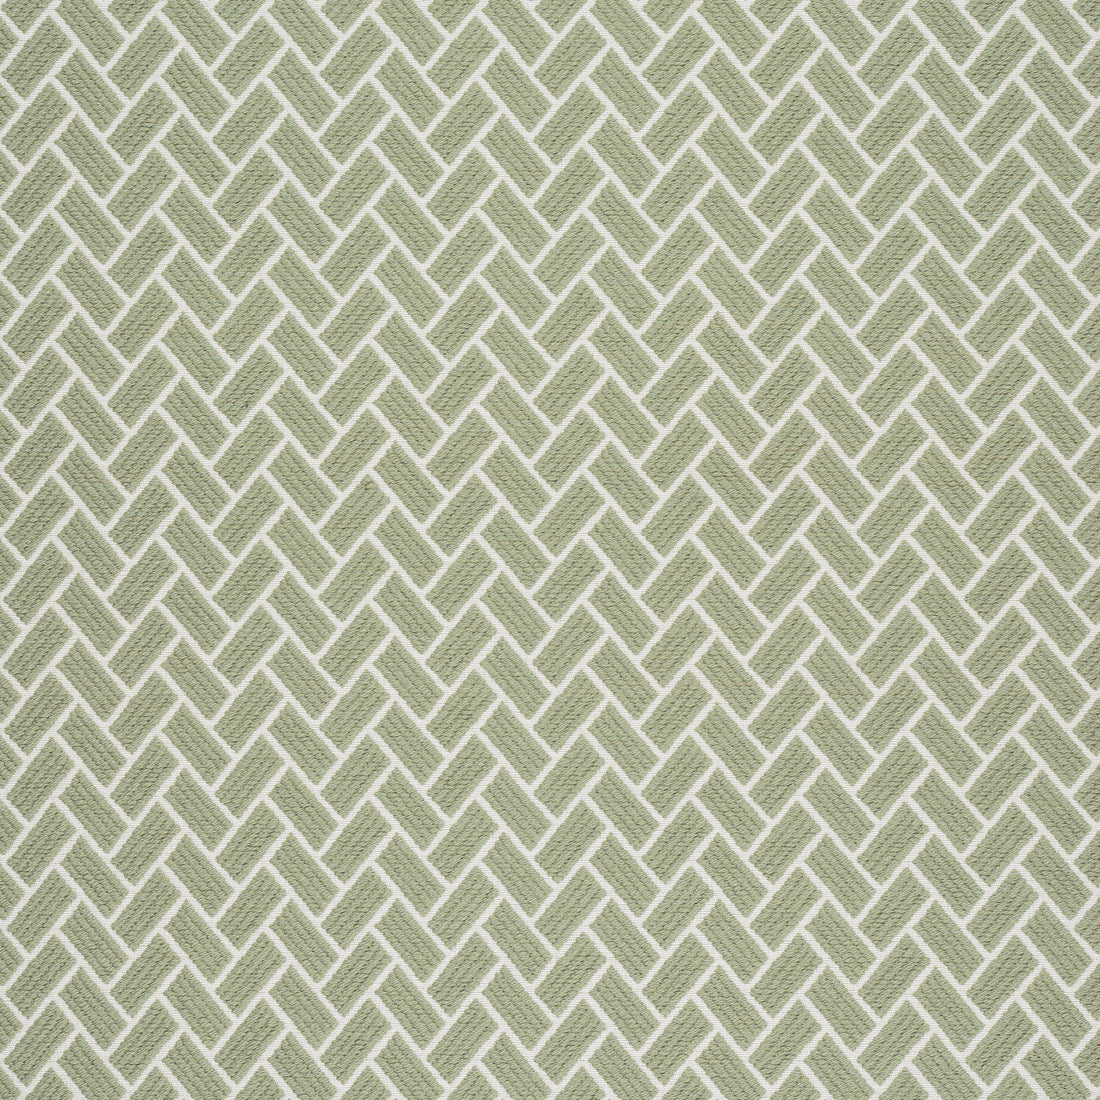 Cobblestone fabric in sage color - pattern number W74217 - by Thibaut in the Passage collection